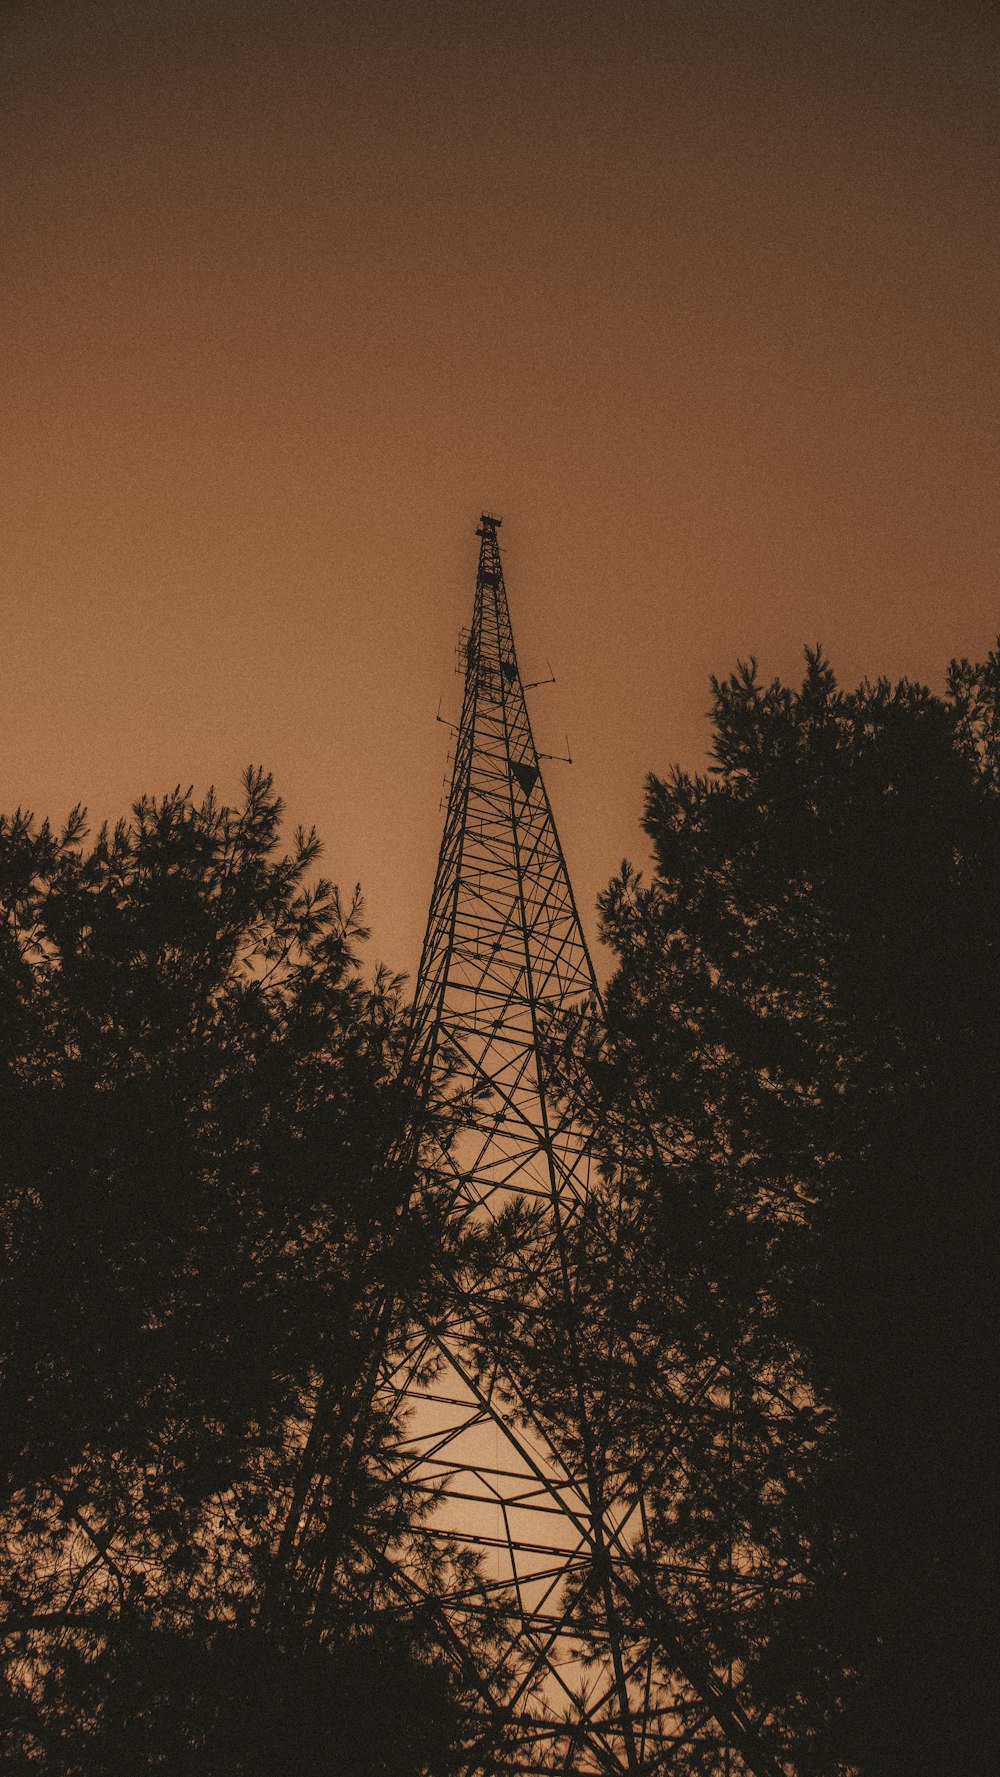 a tall tower with a radio antenna on top of it